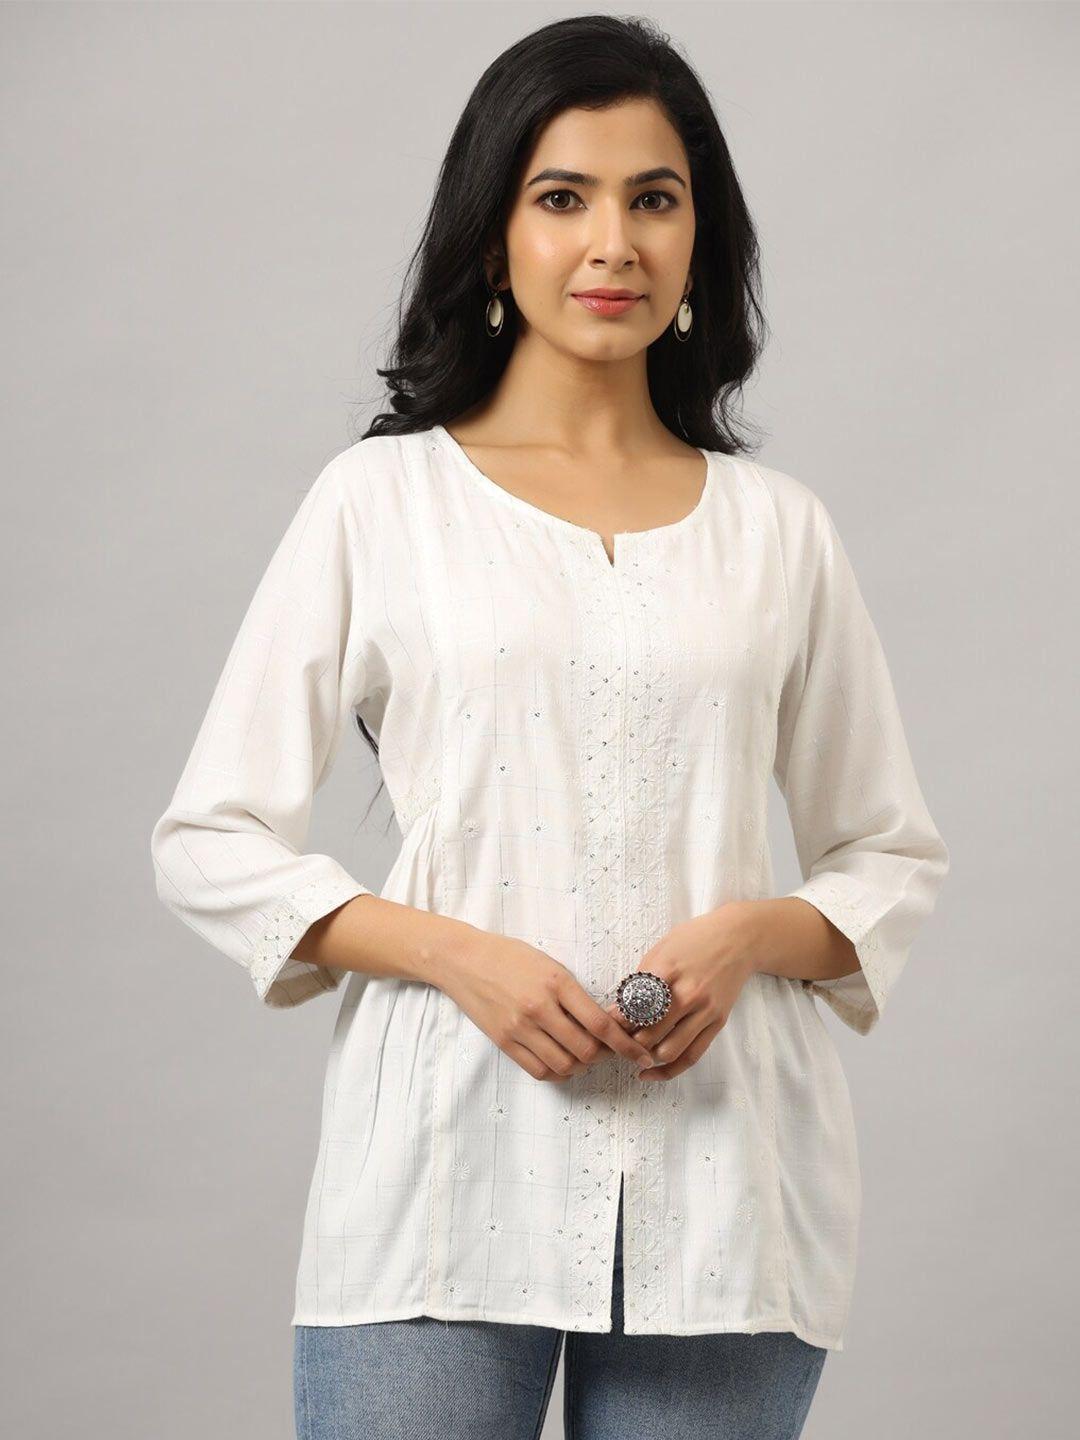 amchoor floral embroidered casual top